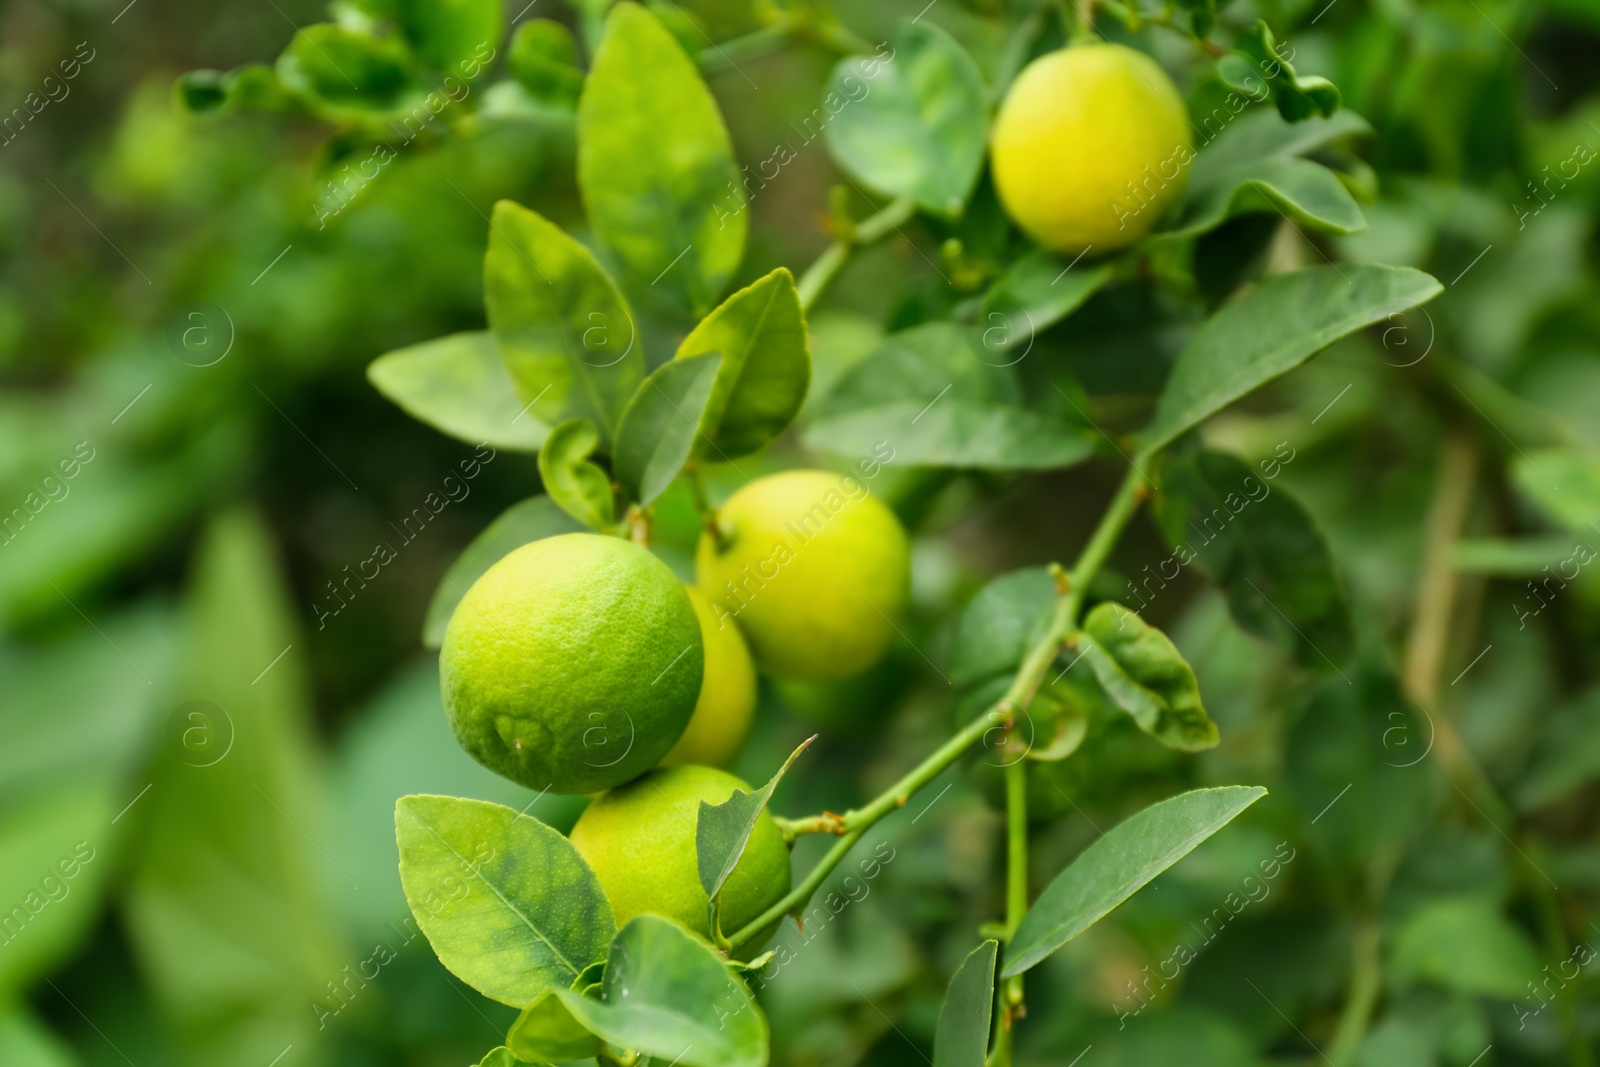 Photo of Ripe limes growing on tree branch in garden, closeup